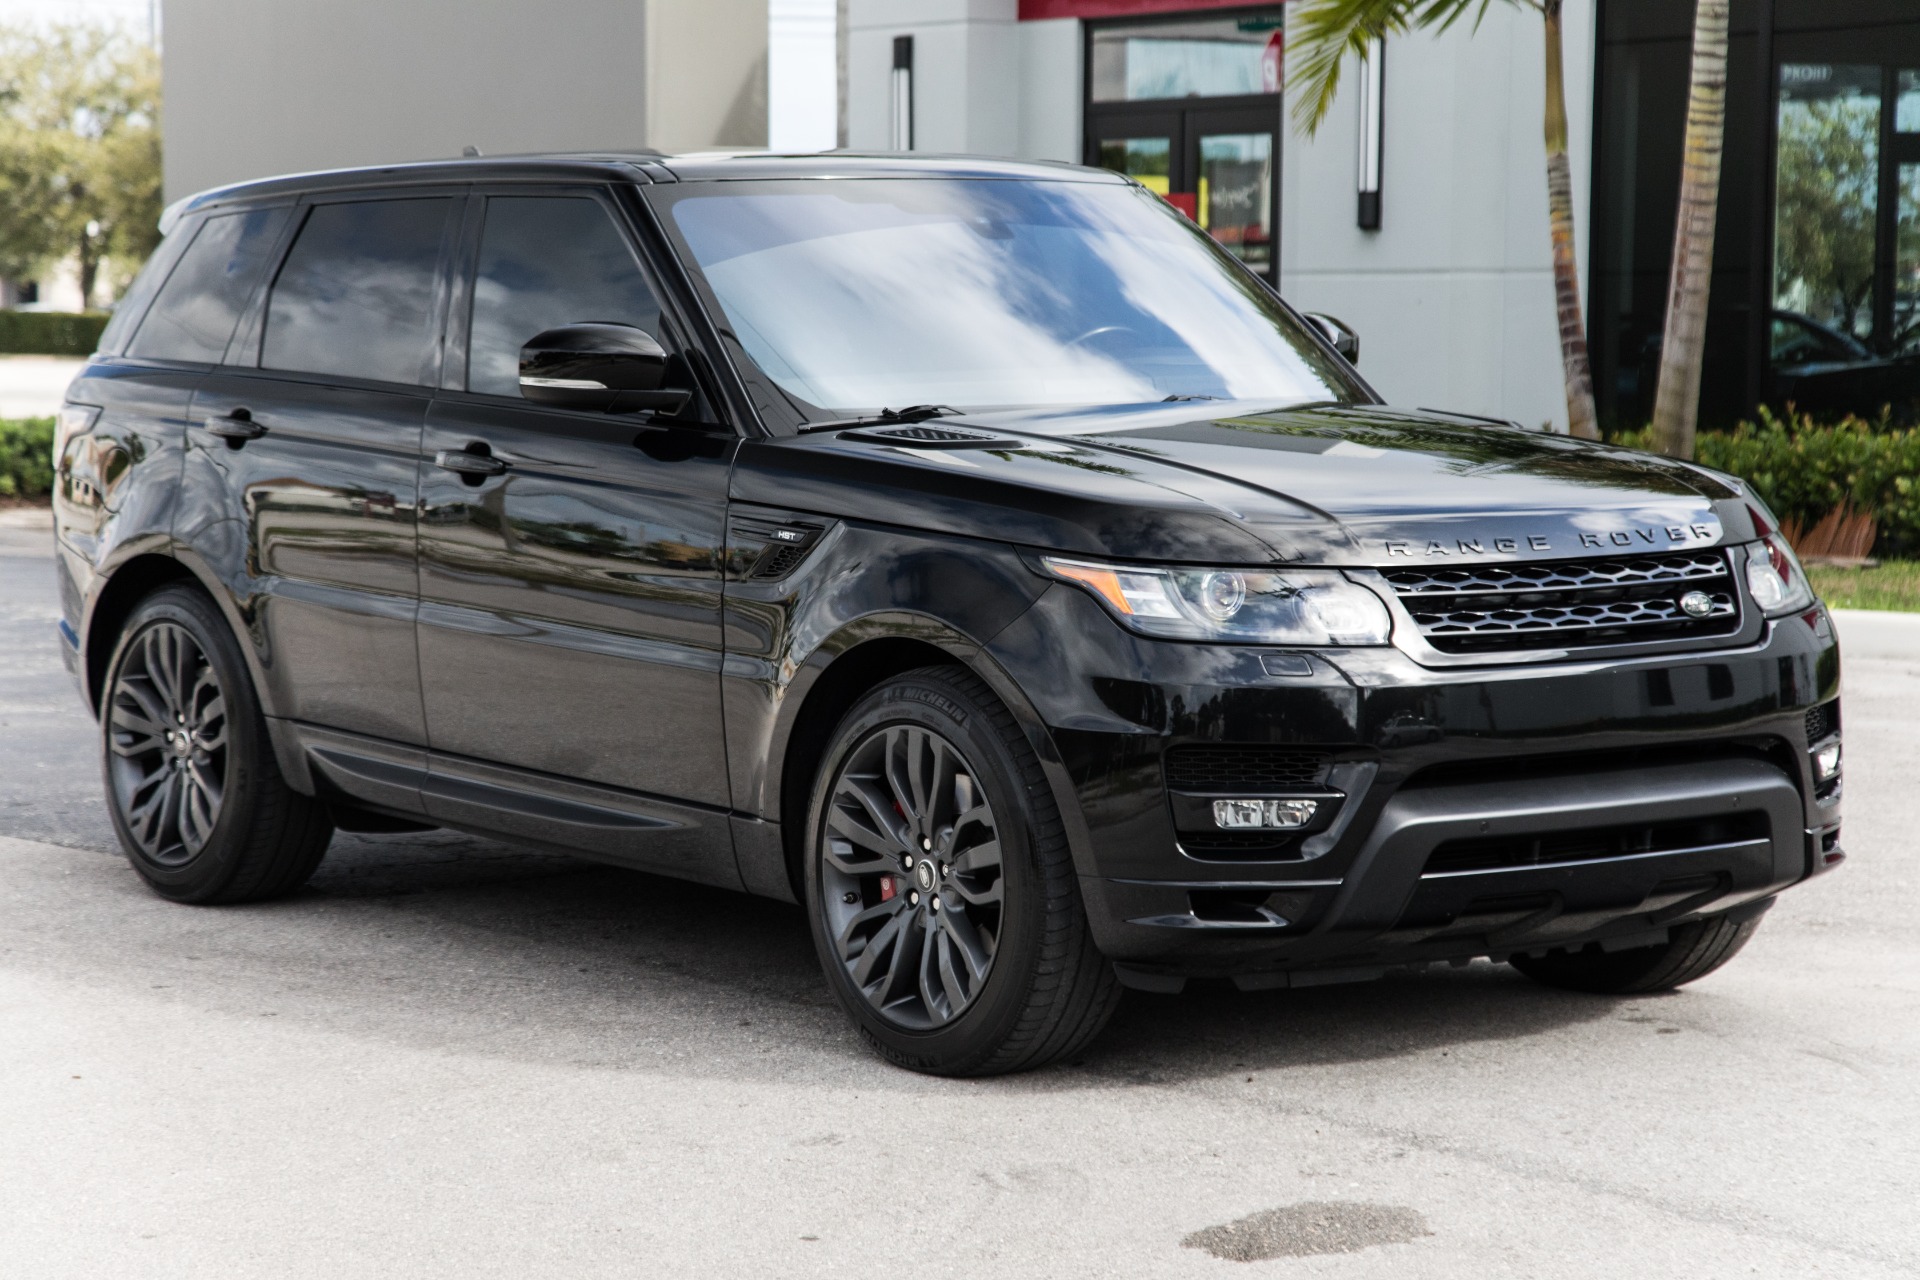 Used 2016 Land Rover Range Rover Sport HST For Sale